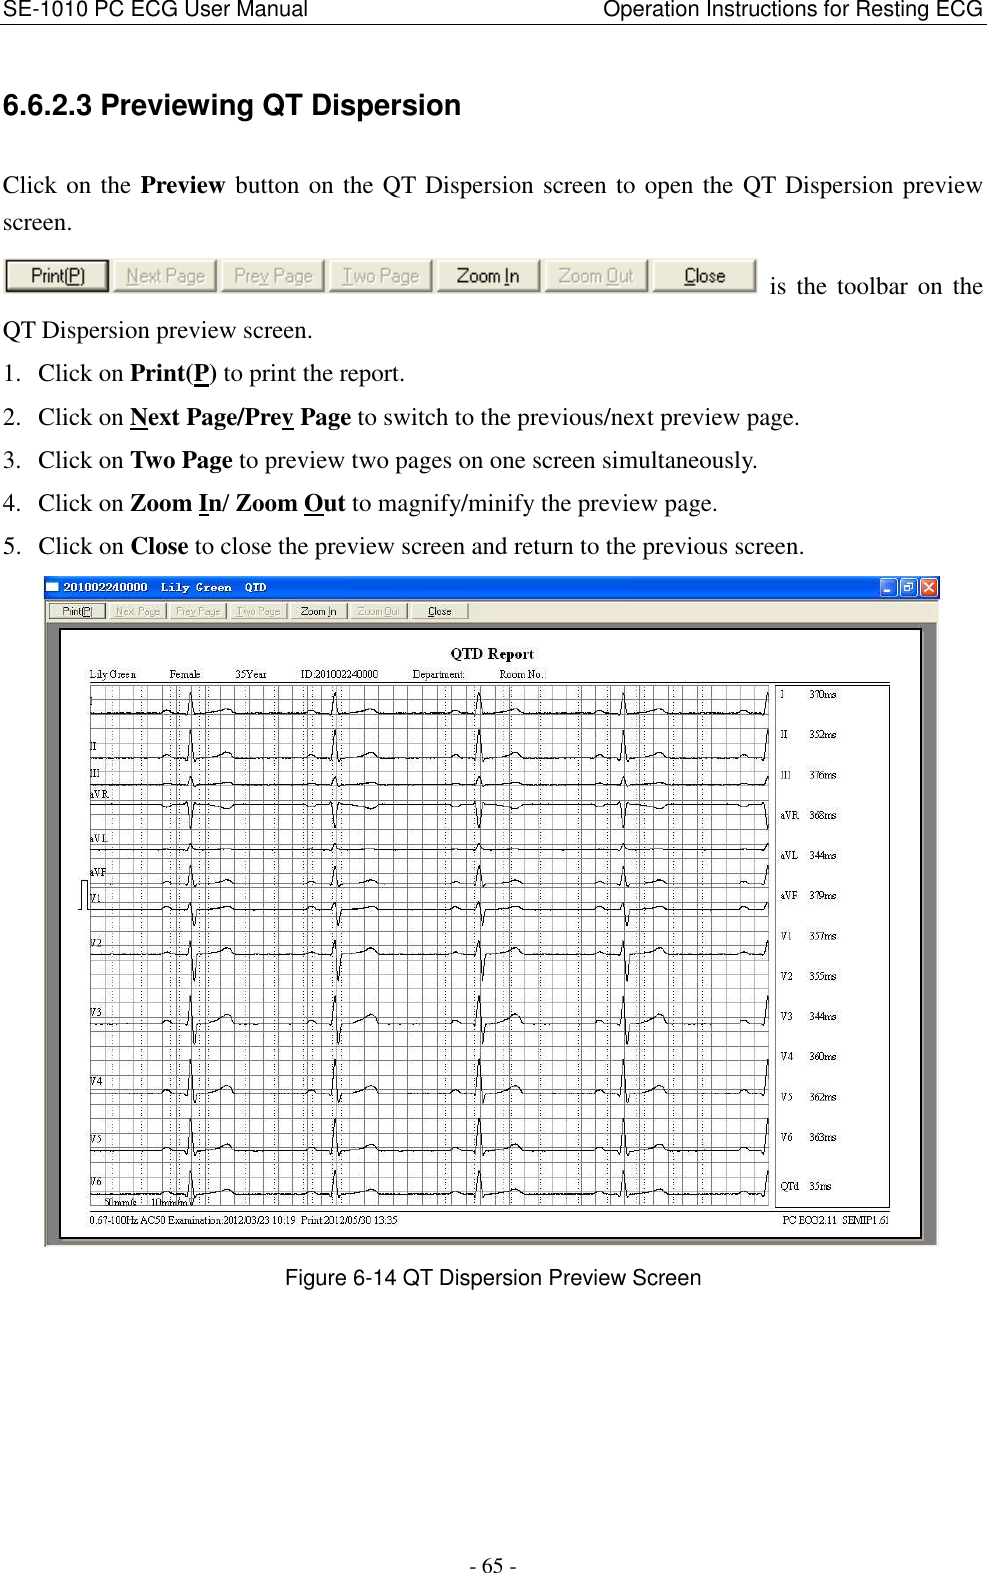 SE-1010 PC ECG User Manual                                                      Operation Instructions for Resting ECG - 65 - 6.6.2.3 Previewing QT Dispersion Click on the Preview button on the QT Dispersion screen to open the QT Dispersion preview screen.   is  the  toolbar  on  the QT Dispersion preview screen. 1. Click on Print(P) to print the report. 2. Click on Next Page/Prev Page to switch to the previous/next preview page. 3. Click on Two Page to preview two pages on one screen simultaneously. 4. Click on Zoom In/ Zoom Out to magnify/minify the preview page. 5. Click on Close to close the preview screen and return to the previous screen.  Figure 6-14 QT Dispersion Preview Screen 